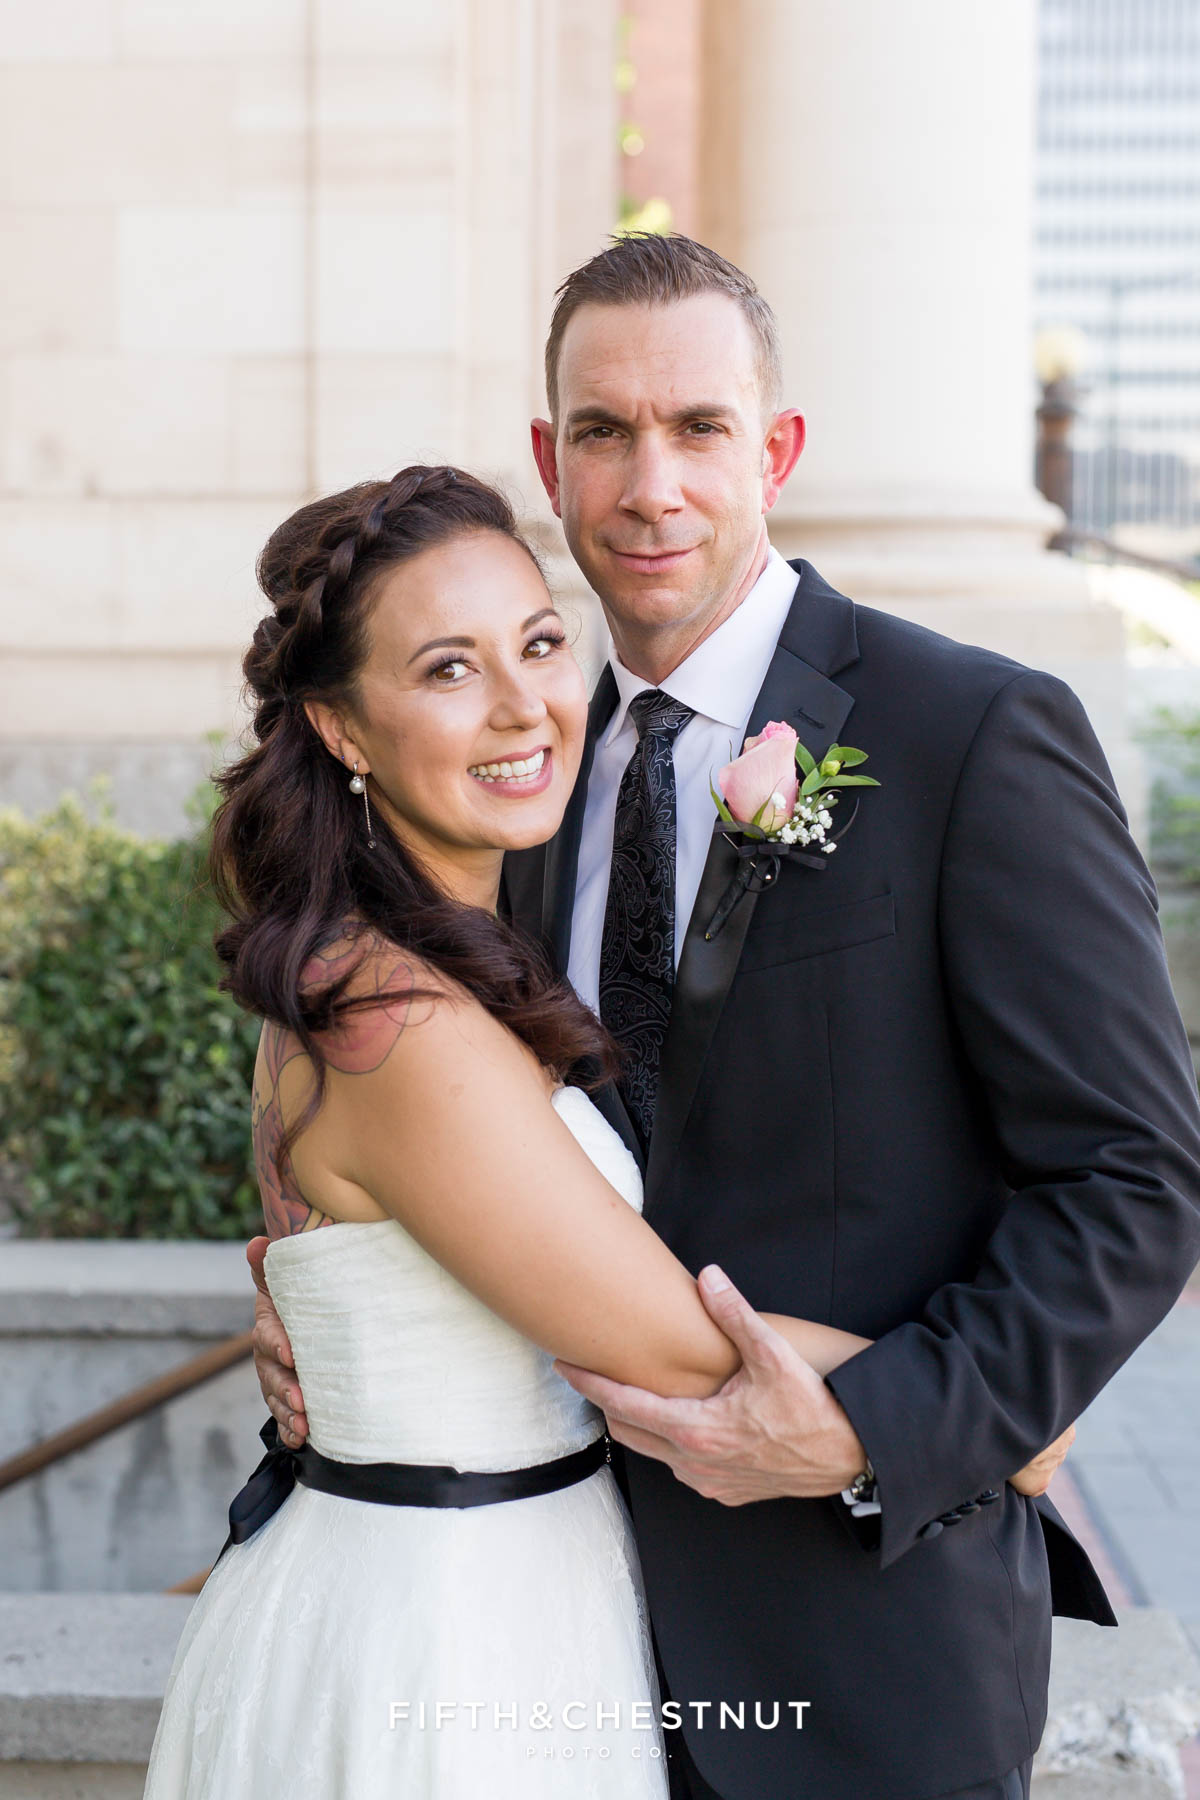 Bride and groom smile for their wedding portrait in Reno